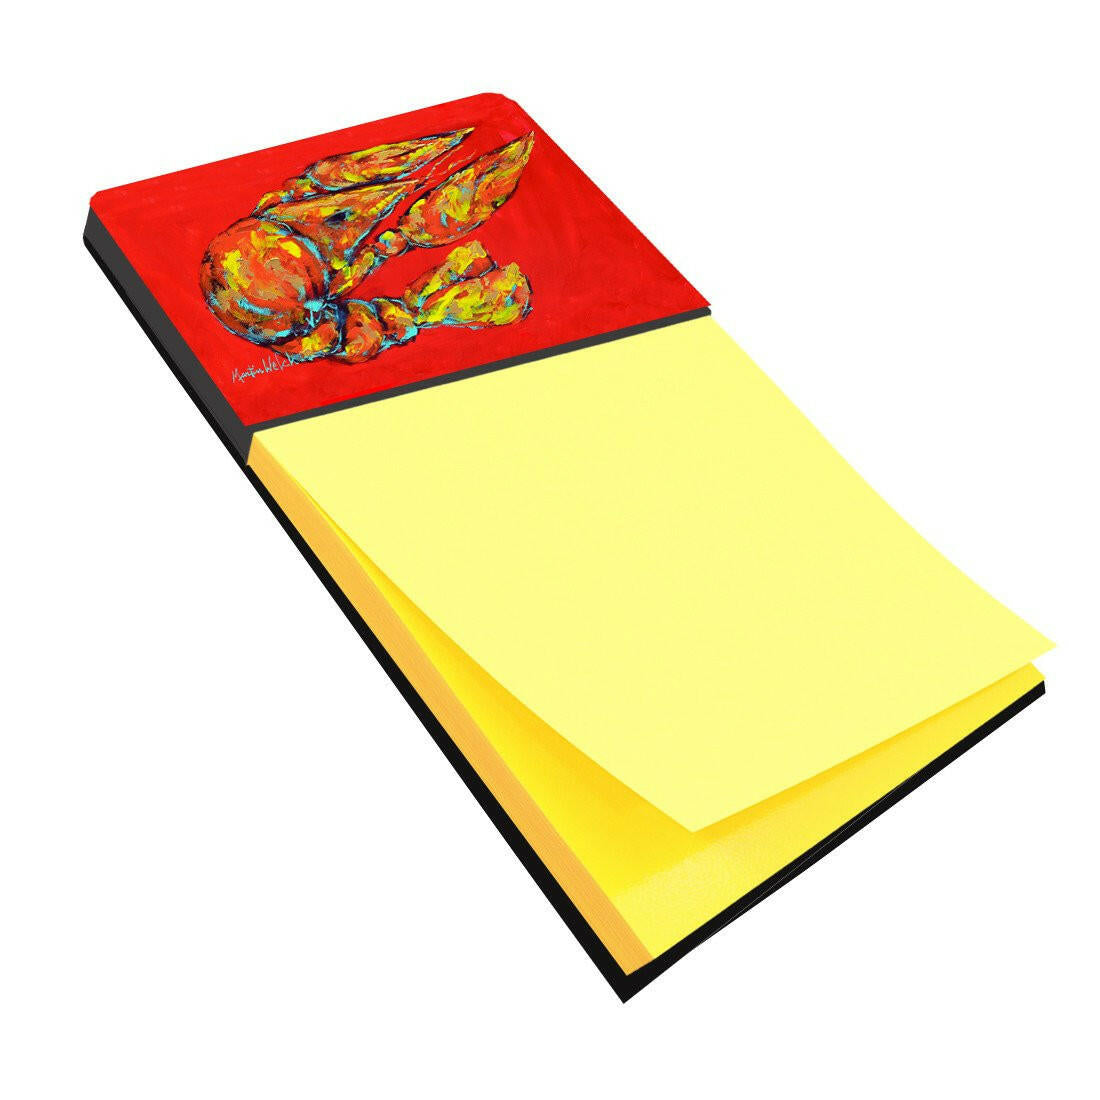 Reach for the Claws Refiillable Sticky Note Holder or Postit Note Dispenser MW1151SN by Caroline's Treasures